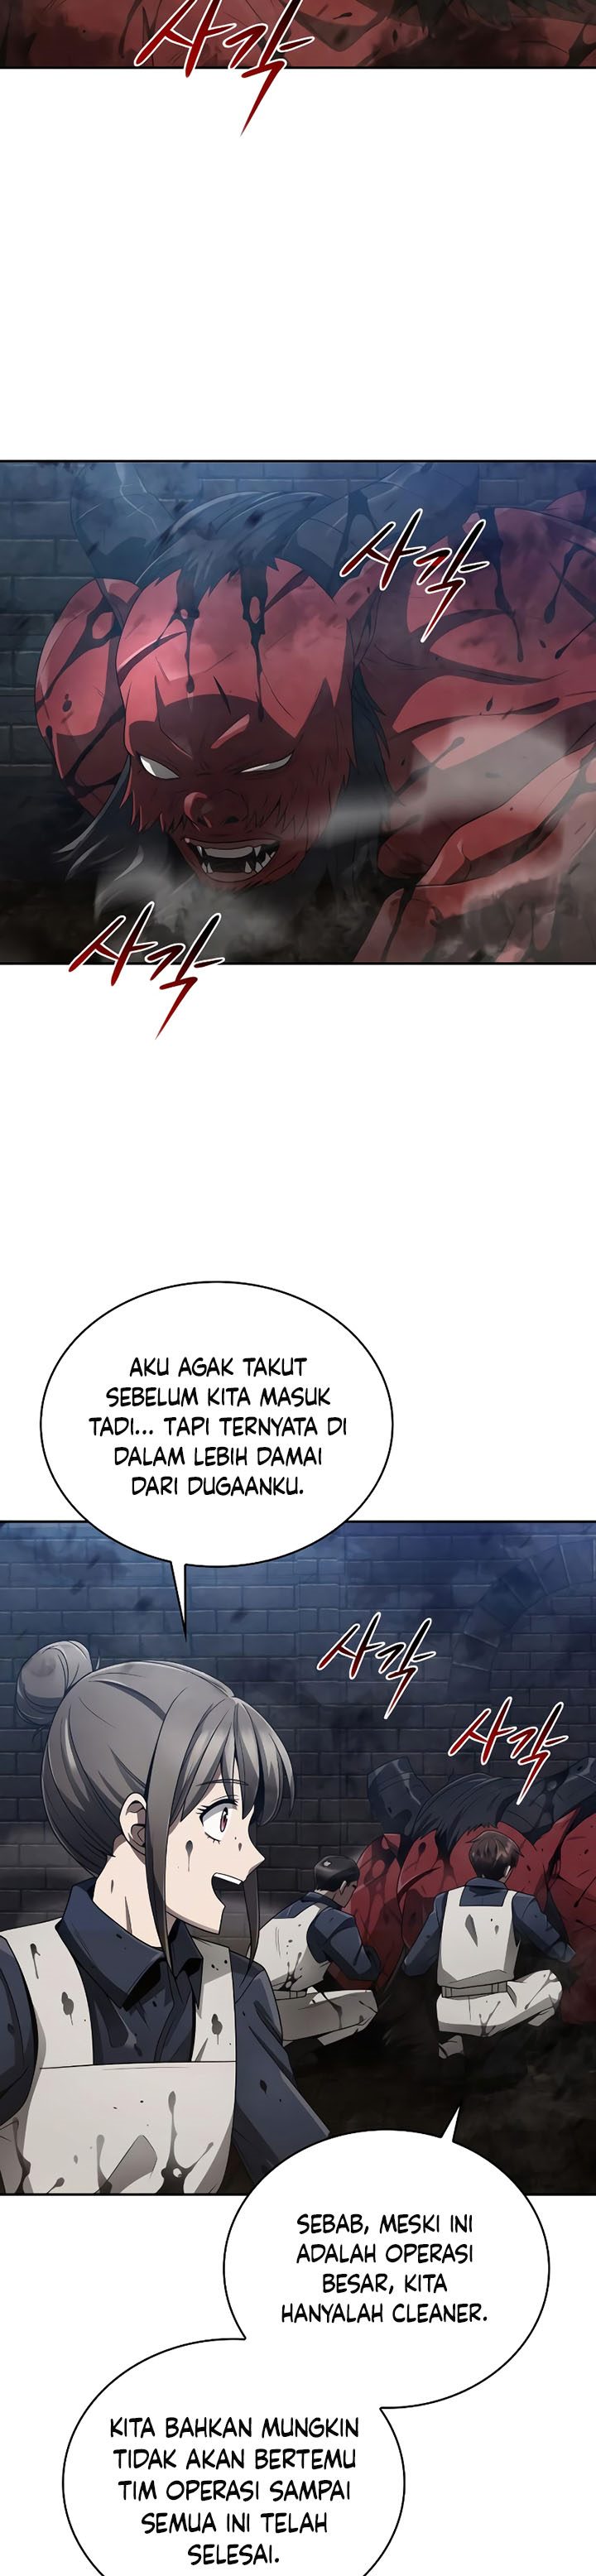 Dilarang COPAS - situs resmi www.mangacanblog.com - Komik clever cleaning life of the returned genius hunter 016 - chapter 16 17 Indonesia clever cleaning life of the returned genius hunter 016 - chapter 16 Terbaru 2|Baca Manga Komik Indonesia|Mangacan